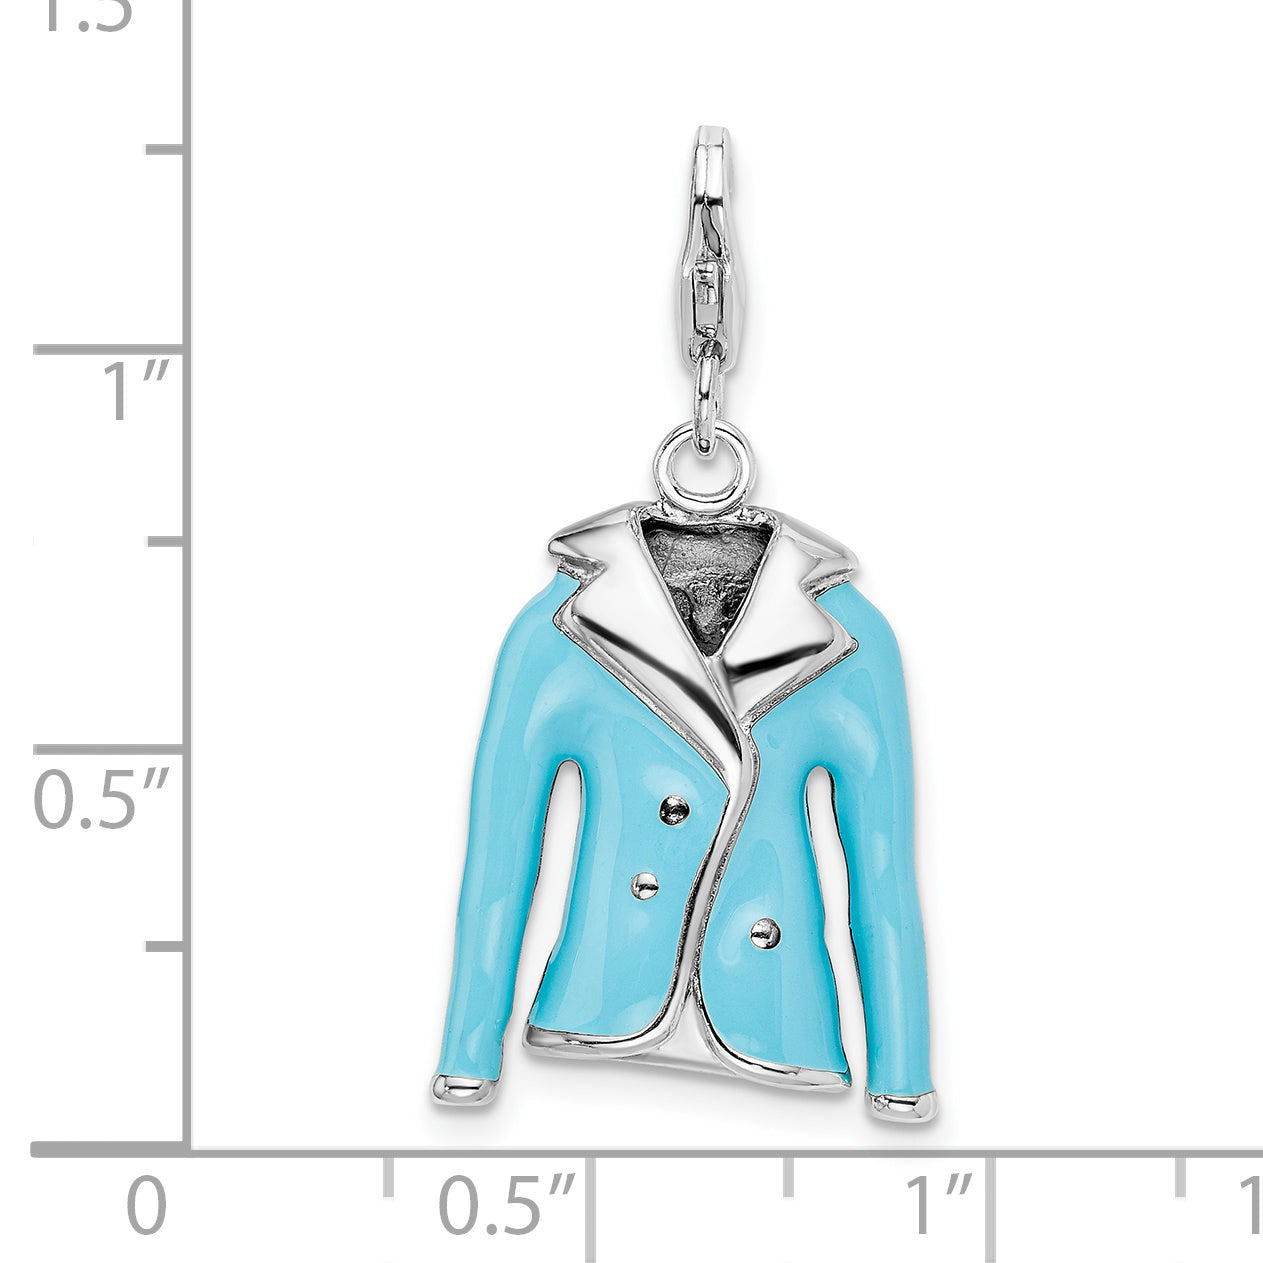 Amore La Vita Sterling Silver Rhodium-plated Polished 3-D Blue Enameled Jacket Charm with Fancy Lobster Clasp